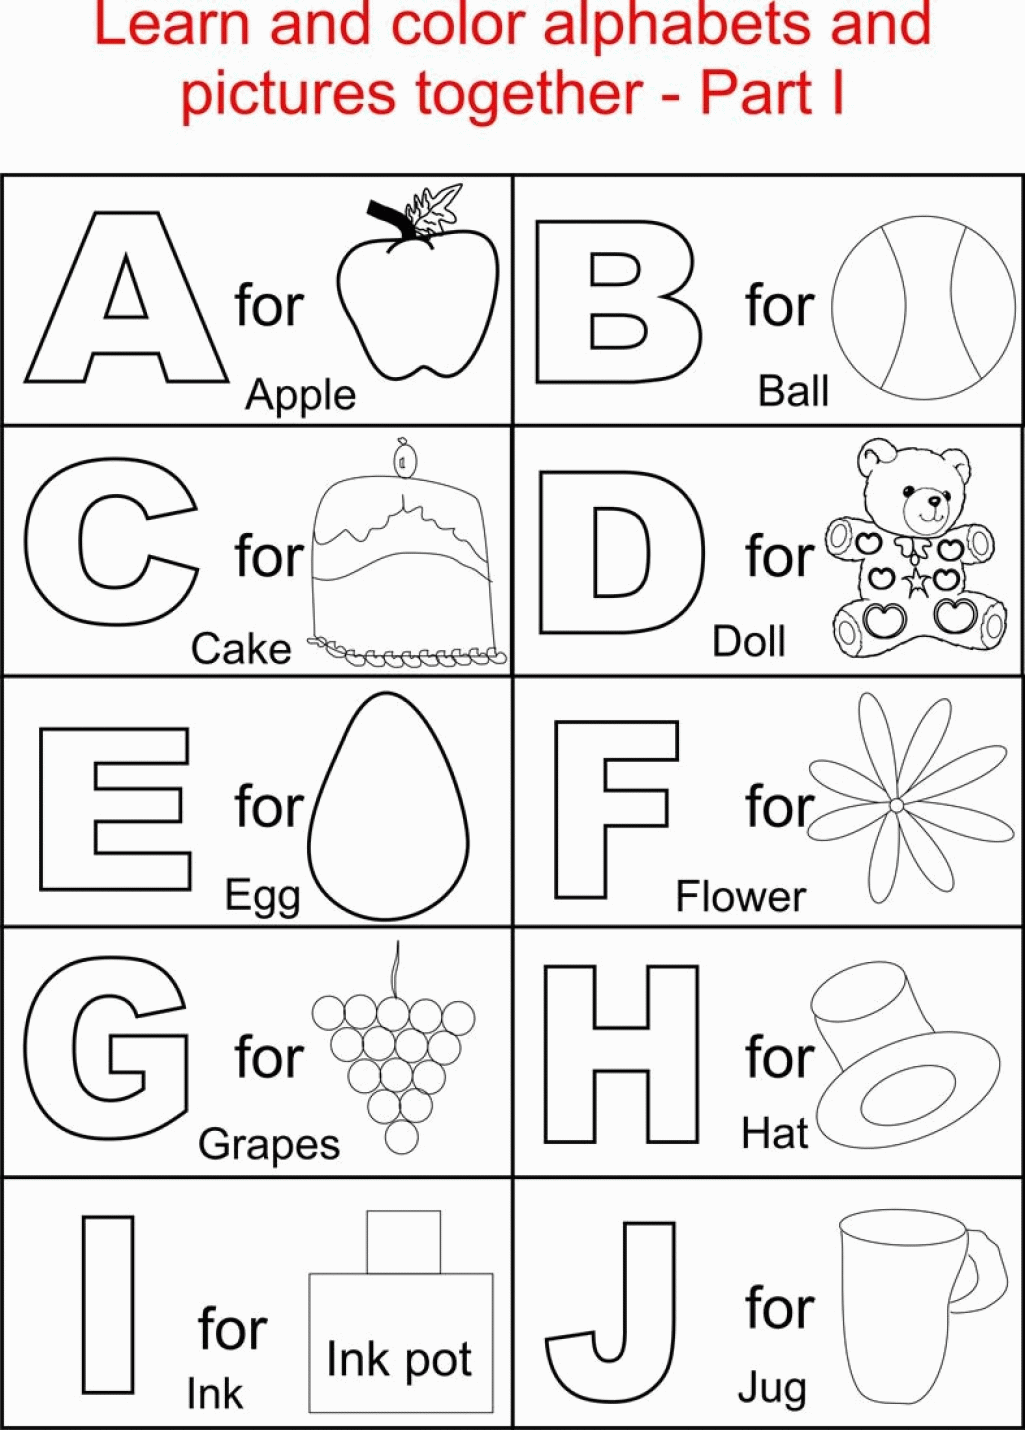 Free Coloring Pages Of Letter And Activities Coloring Pages For ...